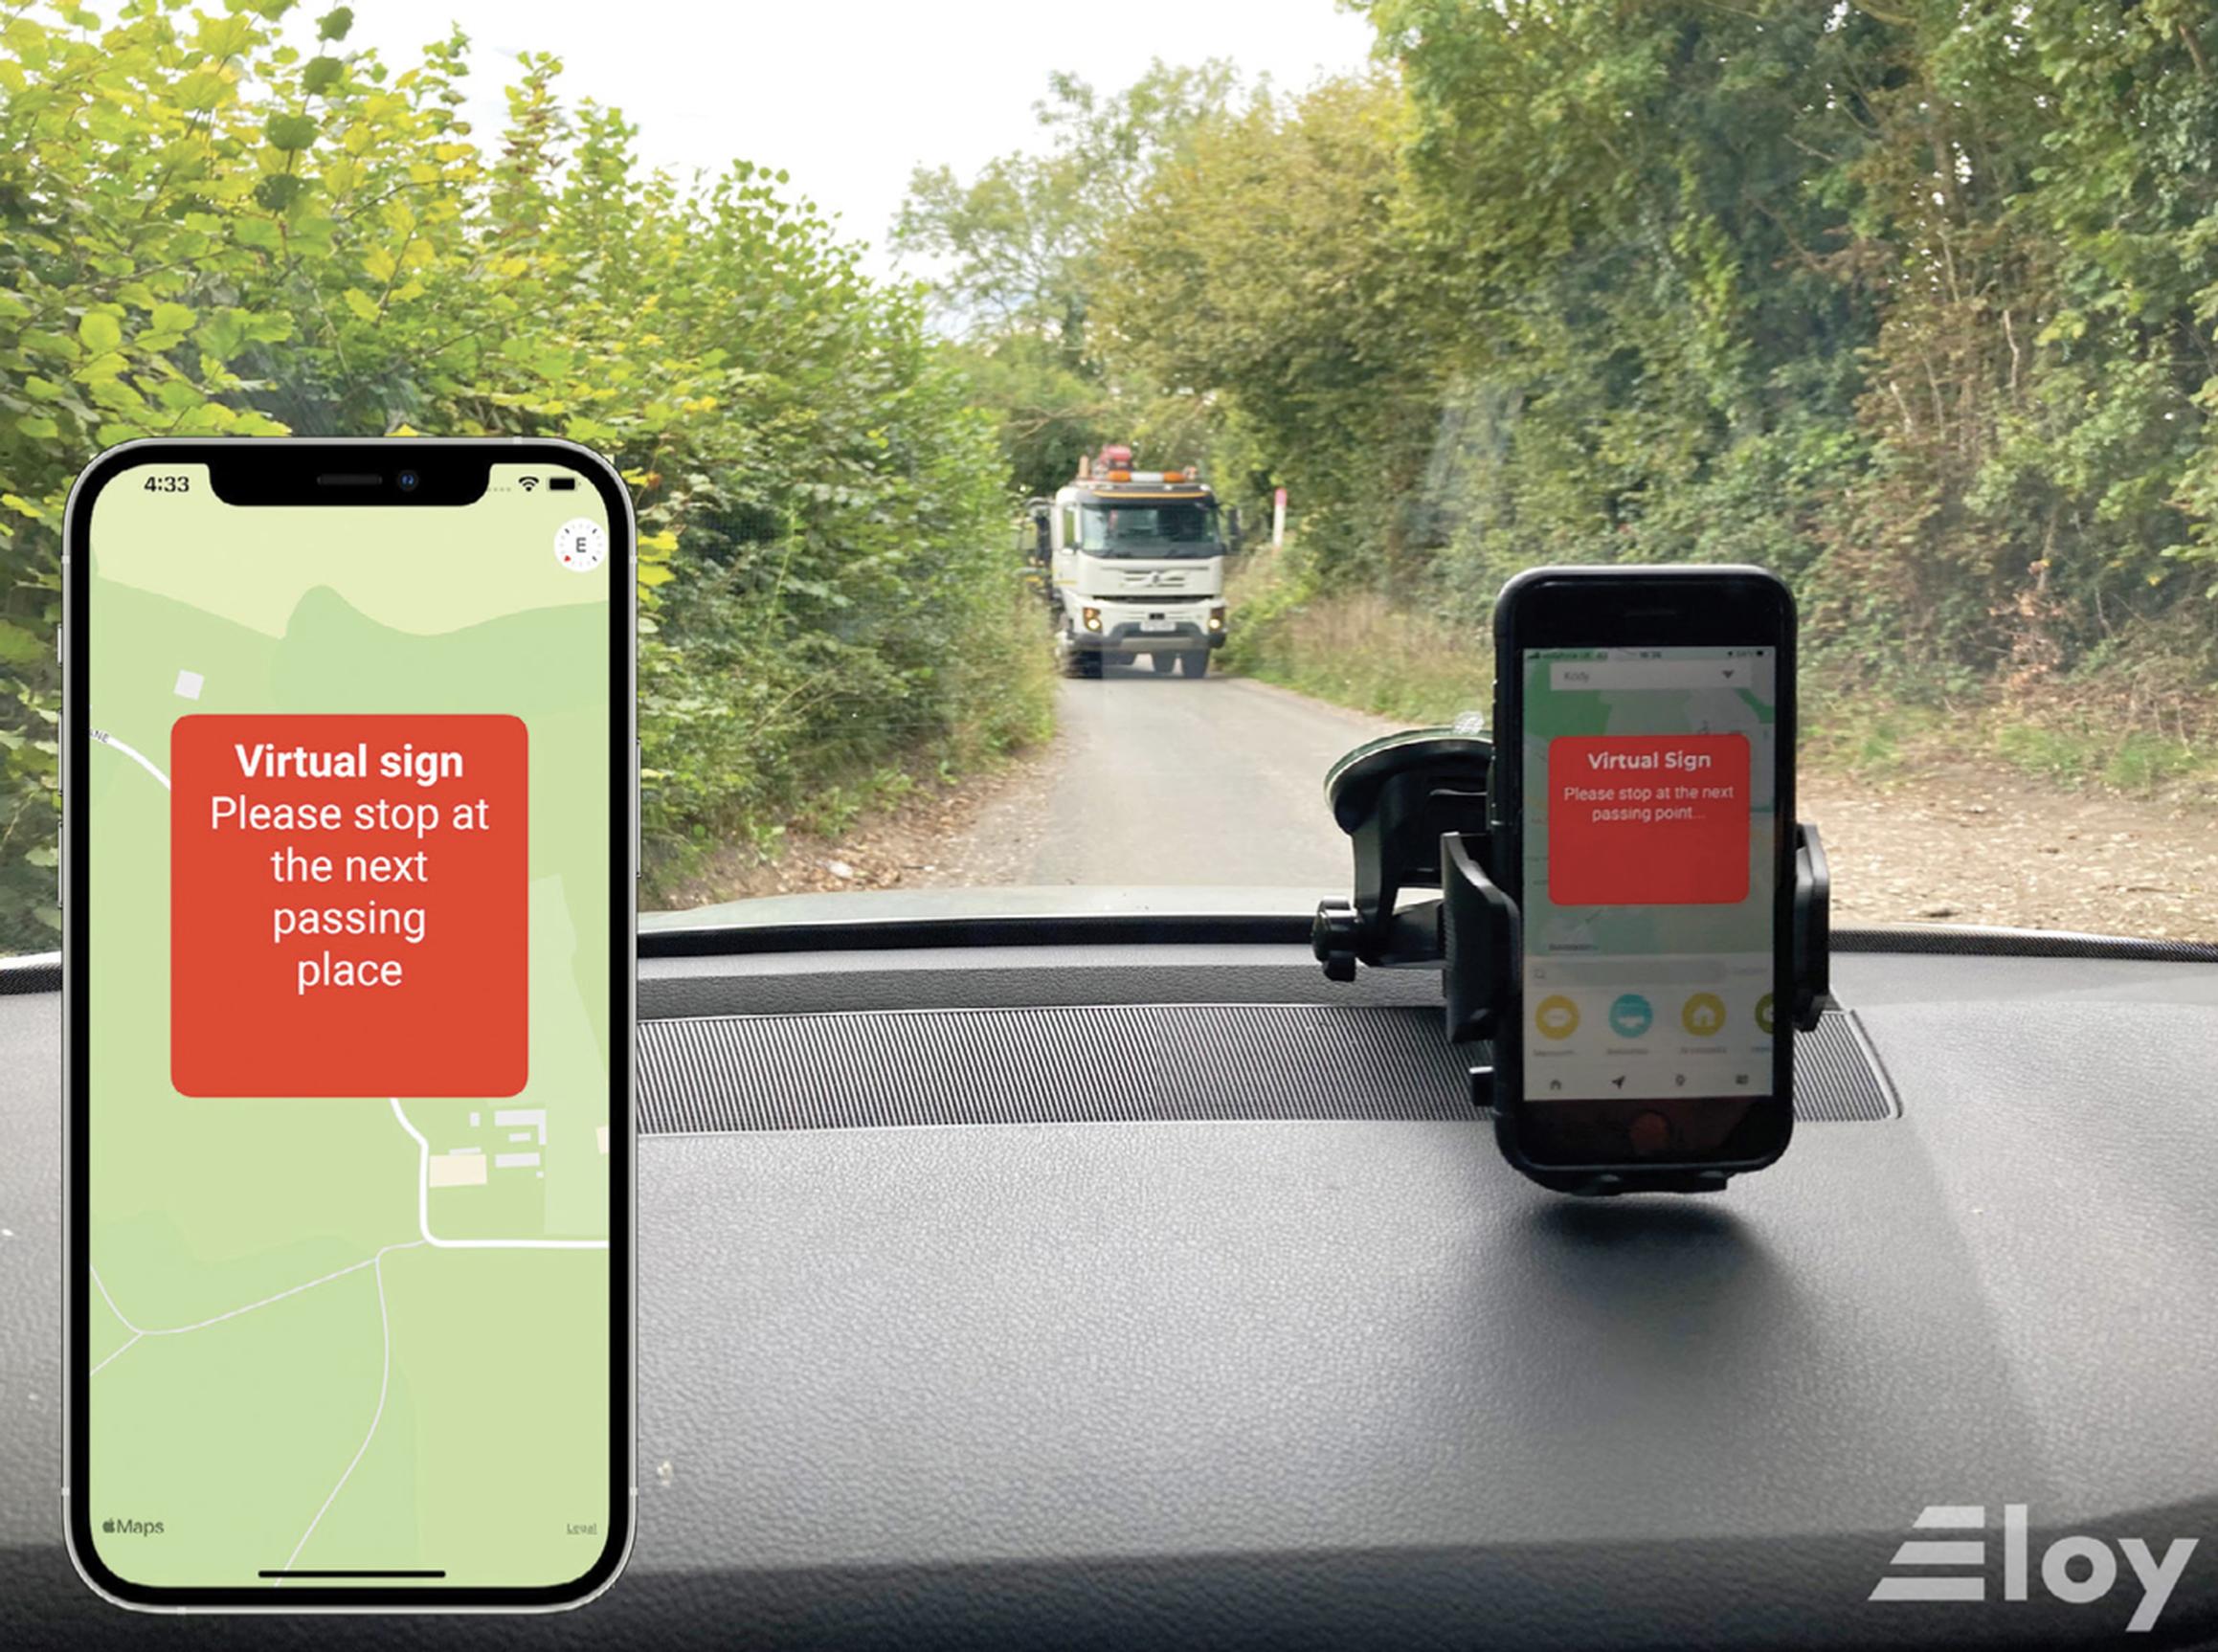 Connected vehicles offer the opportunity to look into the future